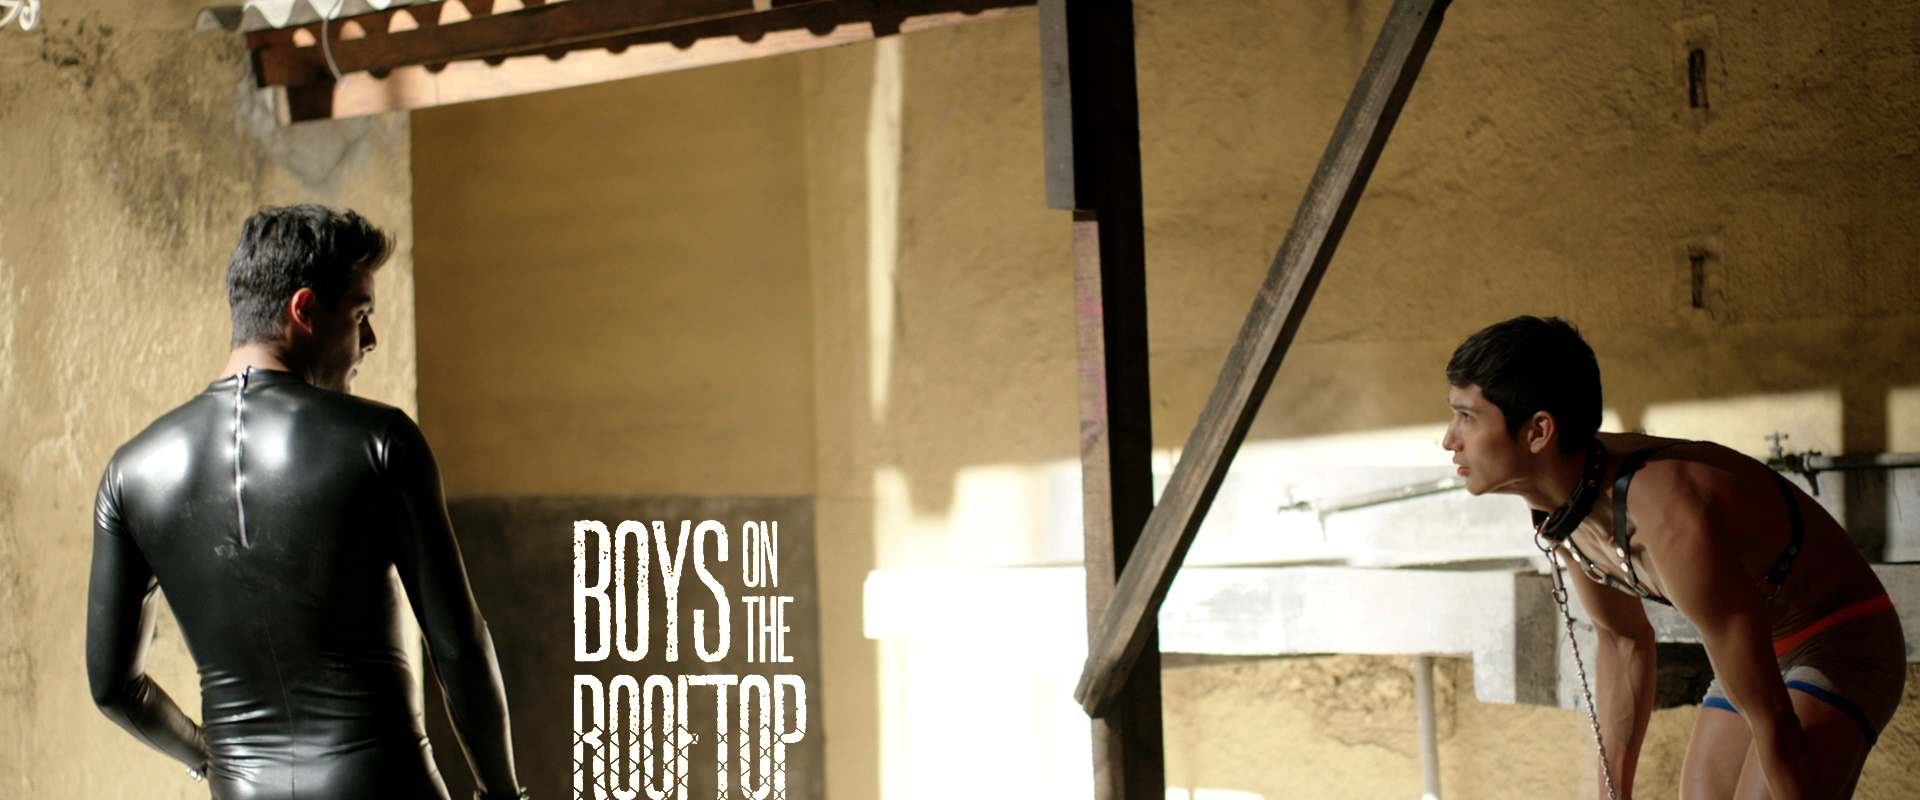 Boys on the Rooftop background 1